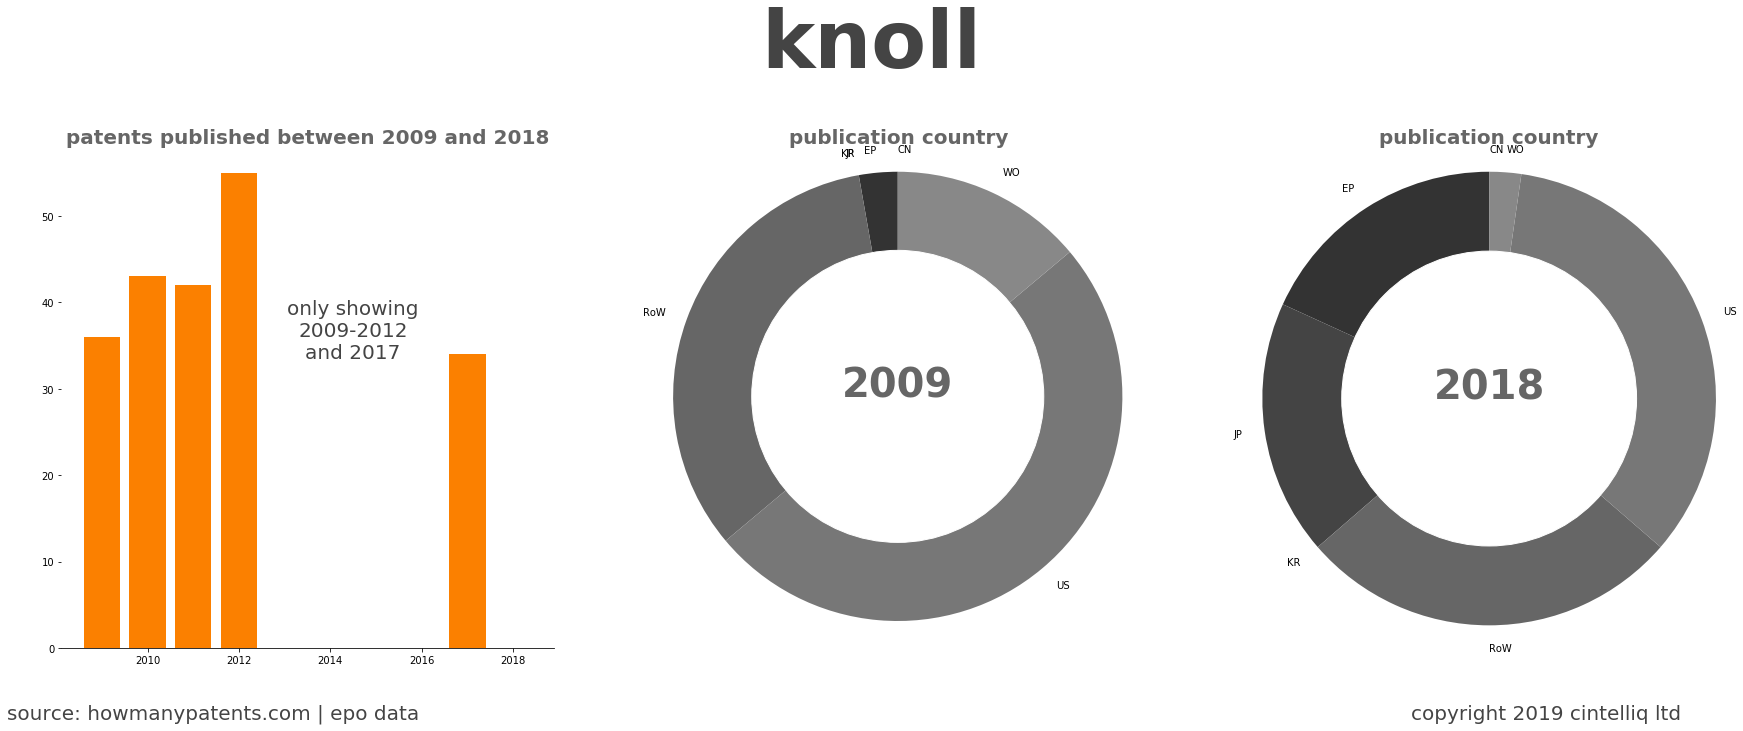 summary of patents for Knoll